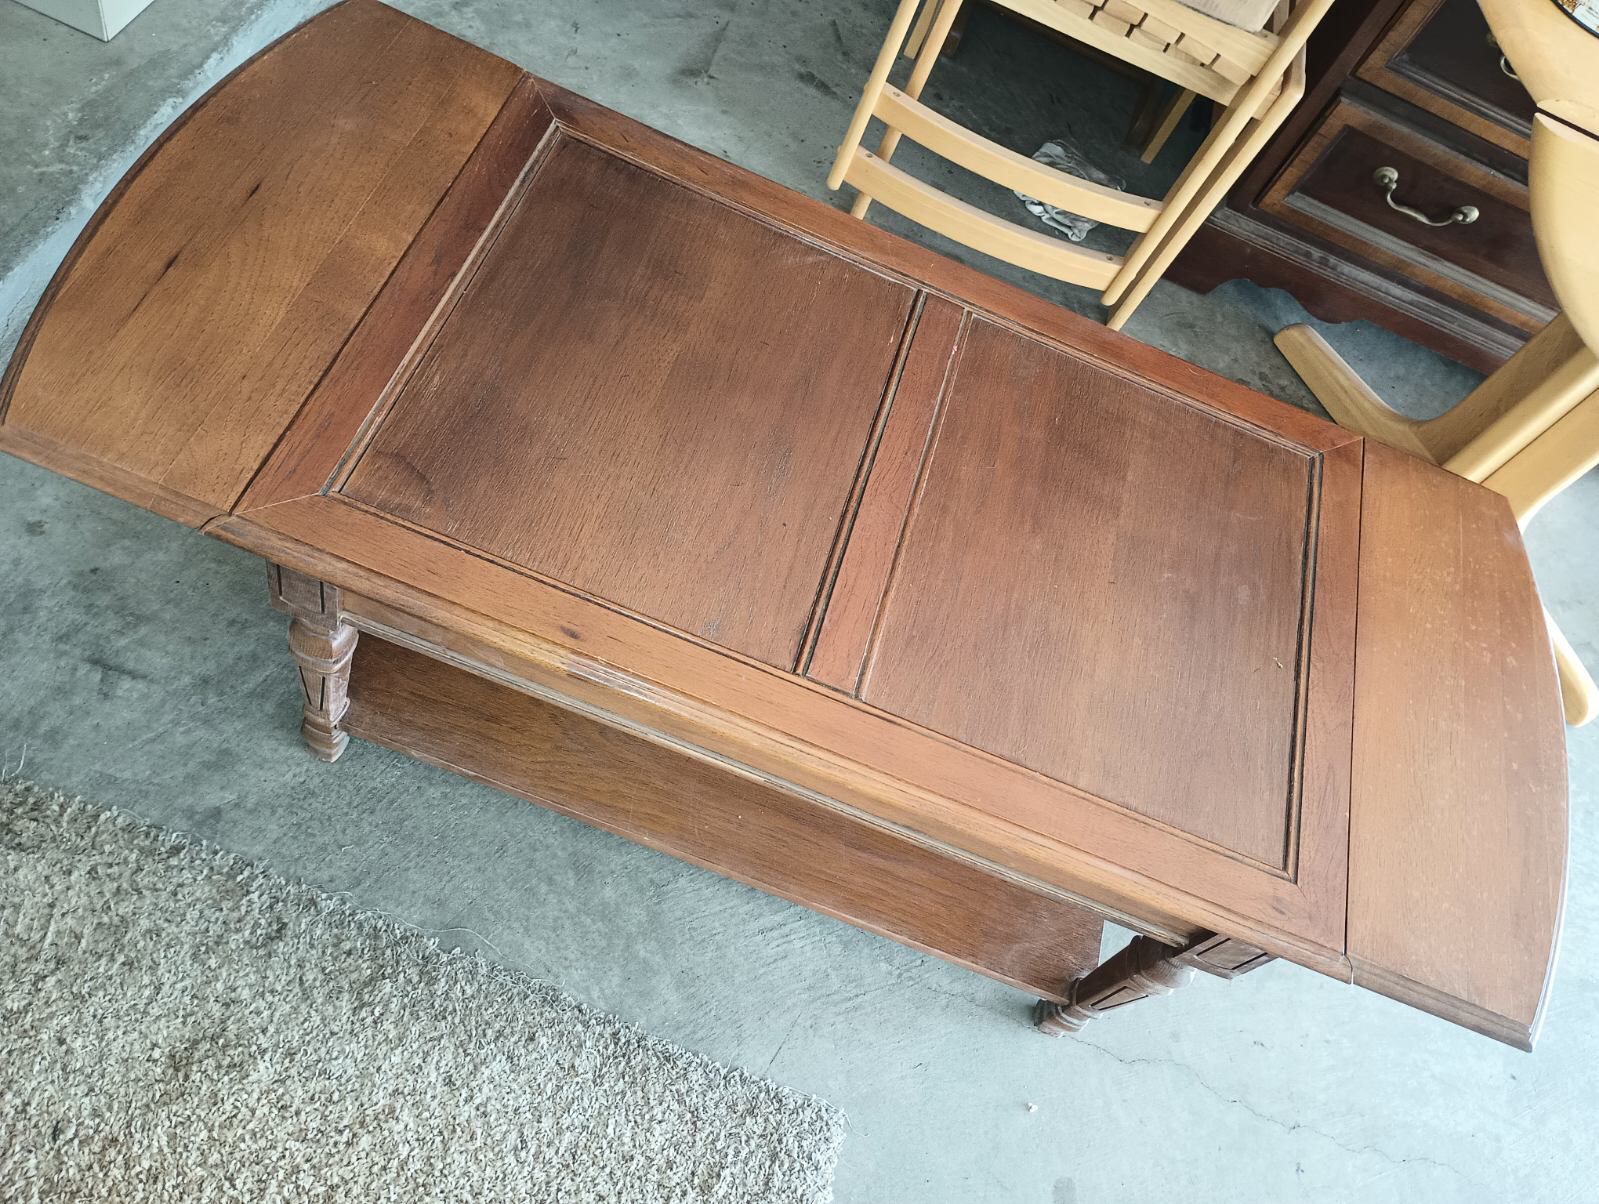 Vintage coffee table, 36-54in L, 2ft W, 17in H, $25